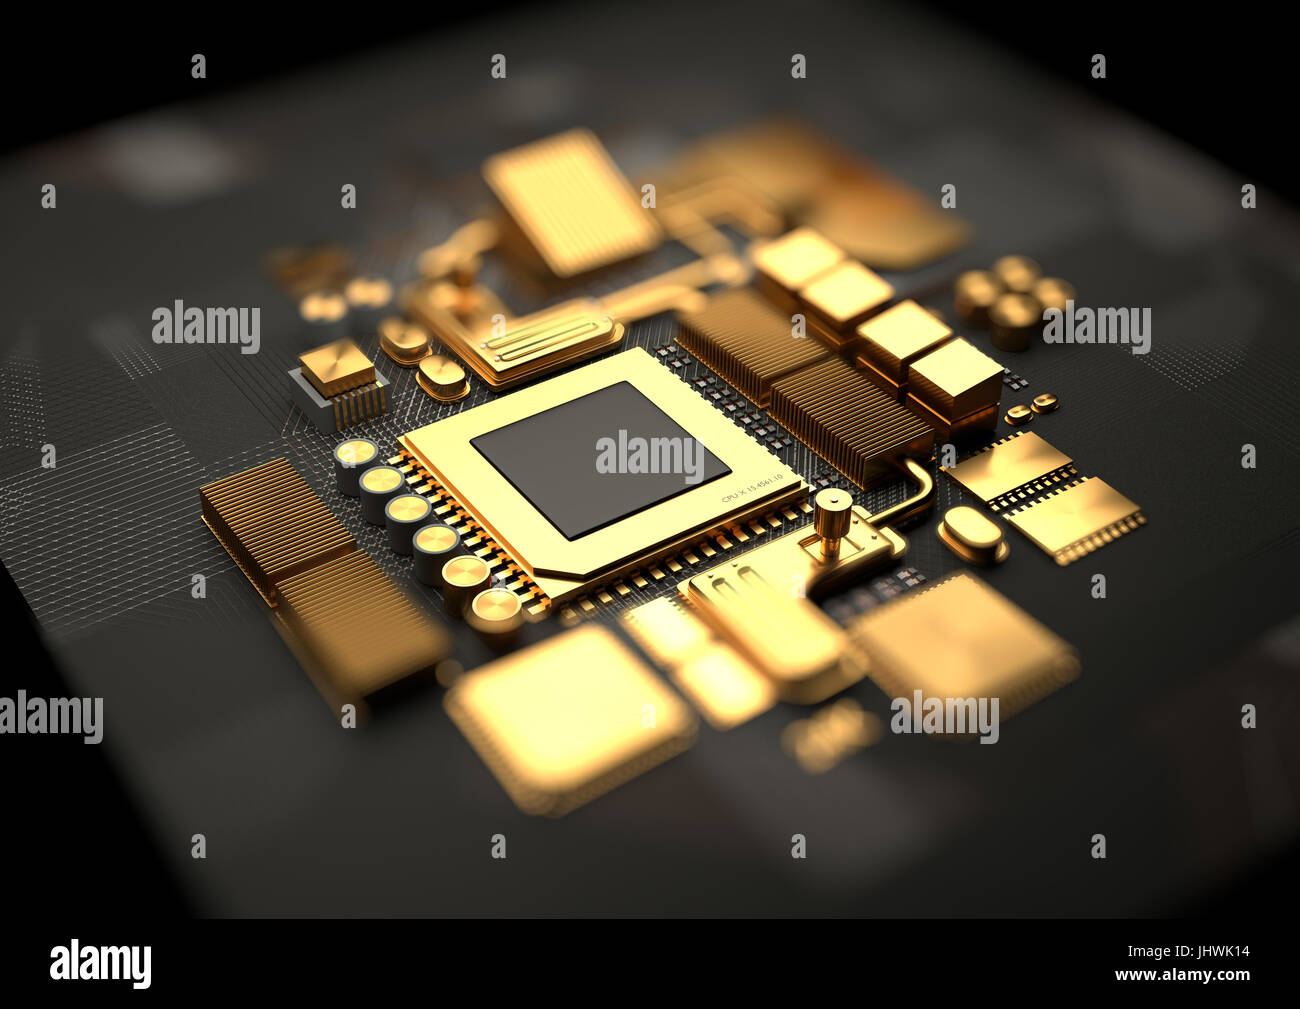 Technology background with 24k gold CPU and motherboard chipset components. 3D illustration render Stock Photo